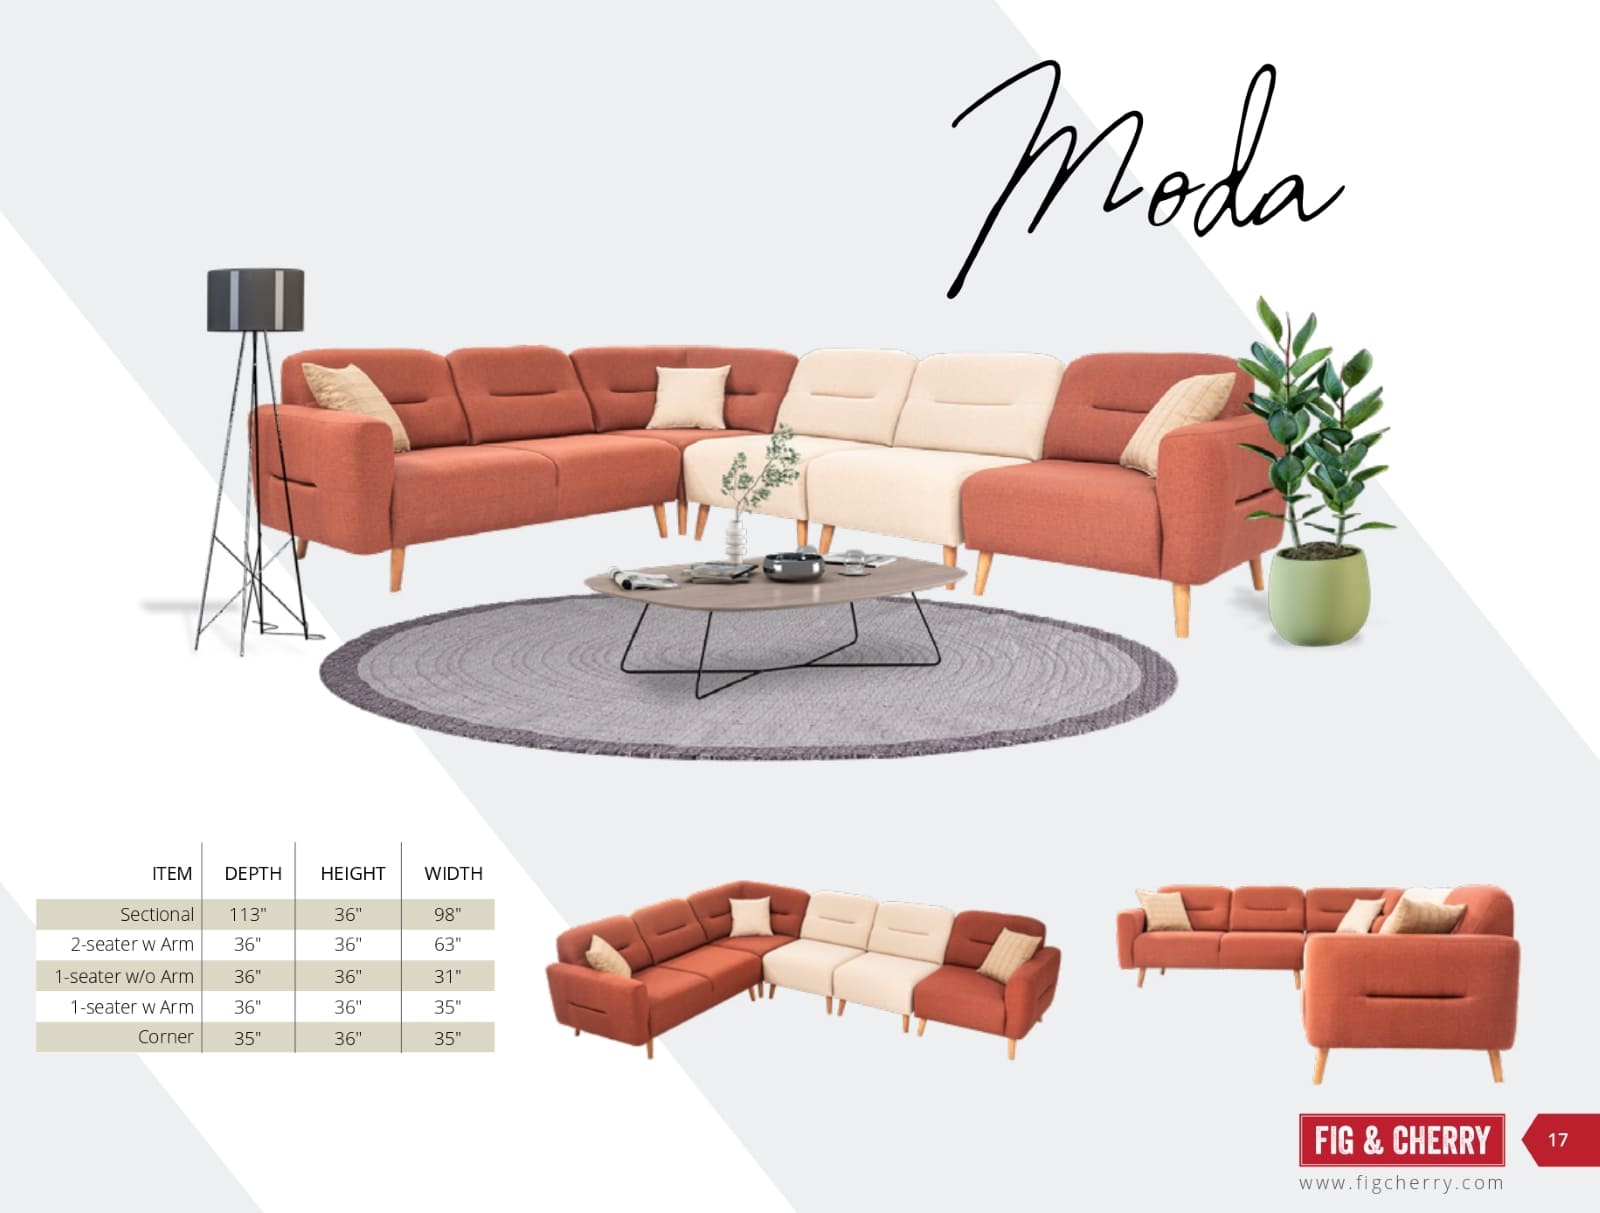 Fig & Cherry Indoor Collection (Sofas and Sectionals) Catalog (17)